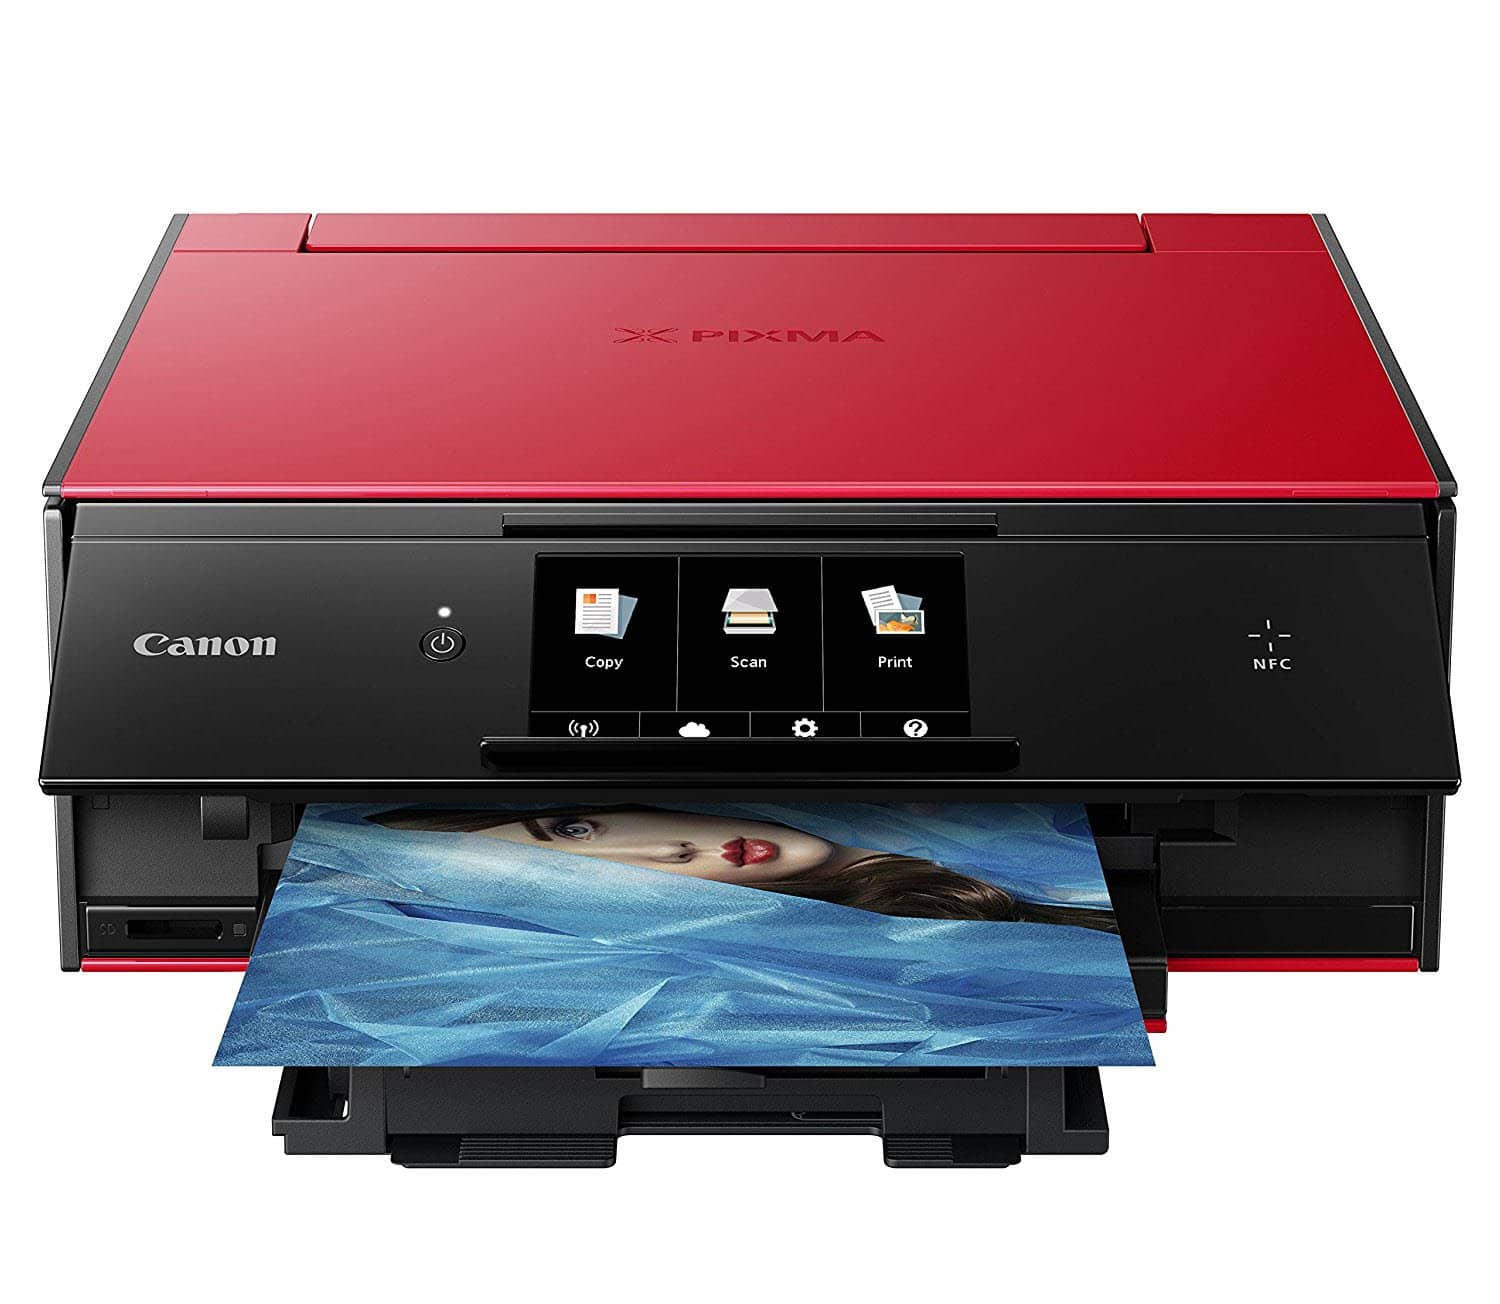 Canon TS9020 Wireless All-In-One Printer with Scanner and Copier - Red